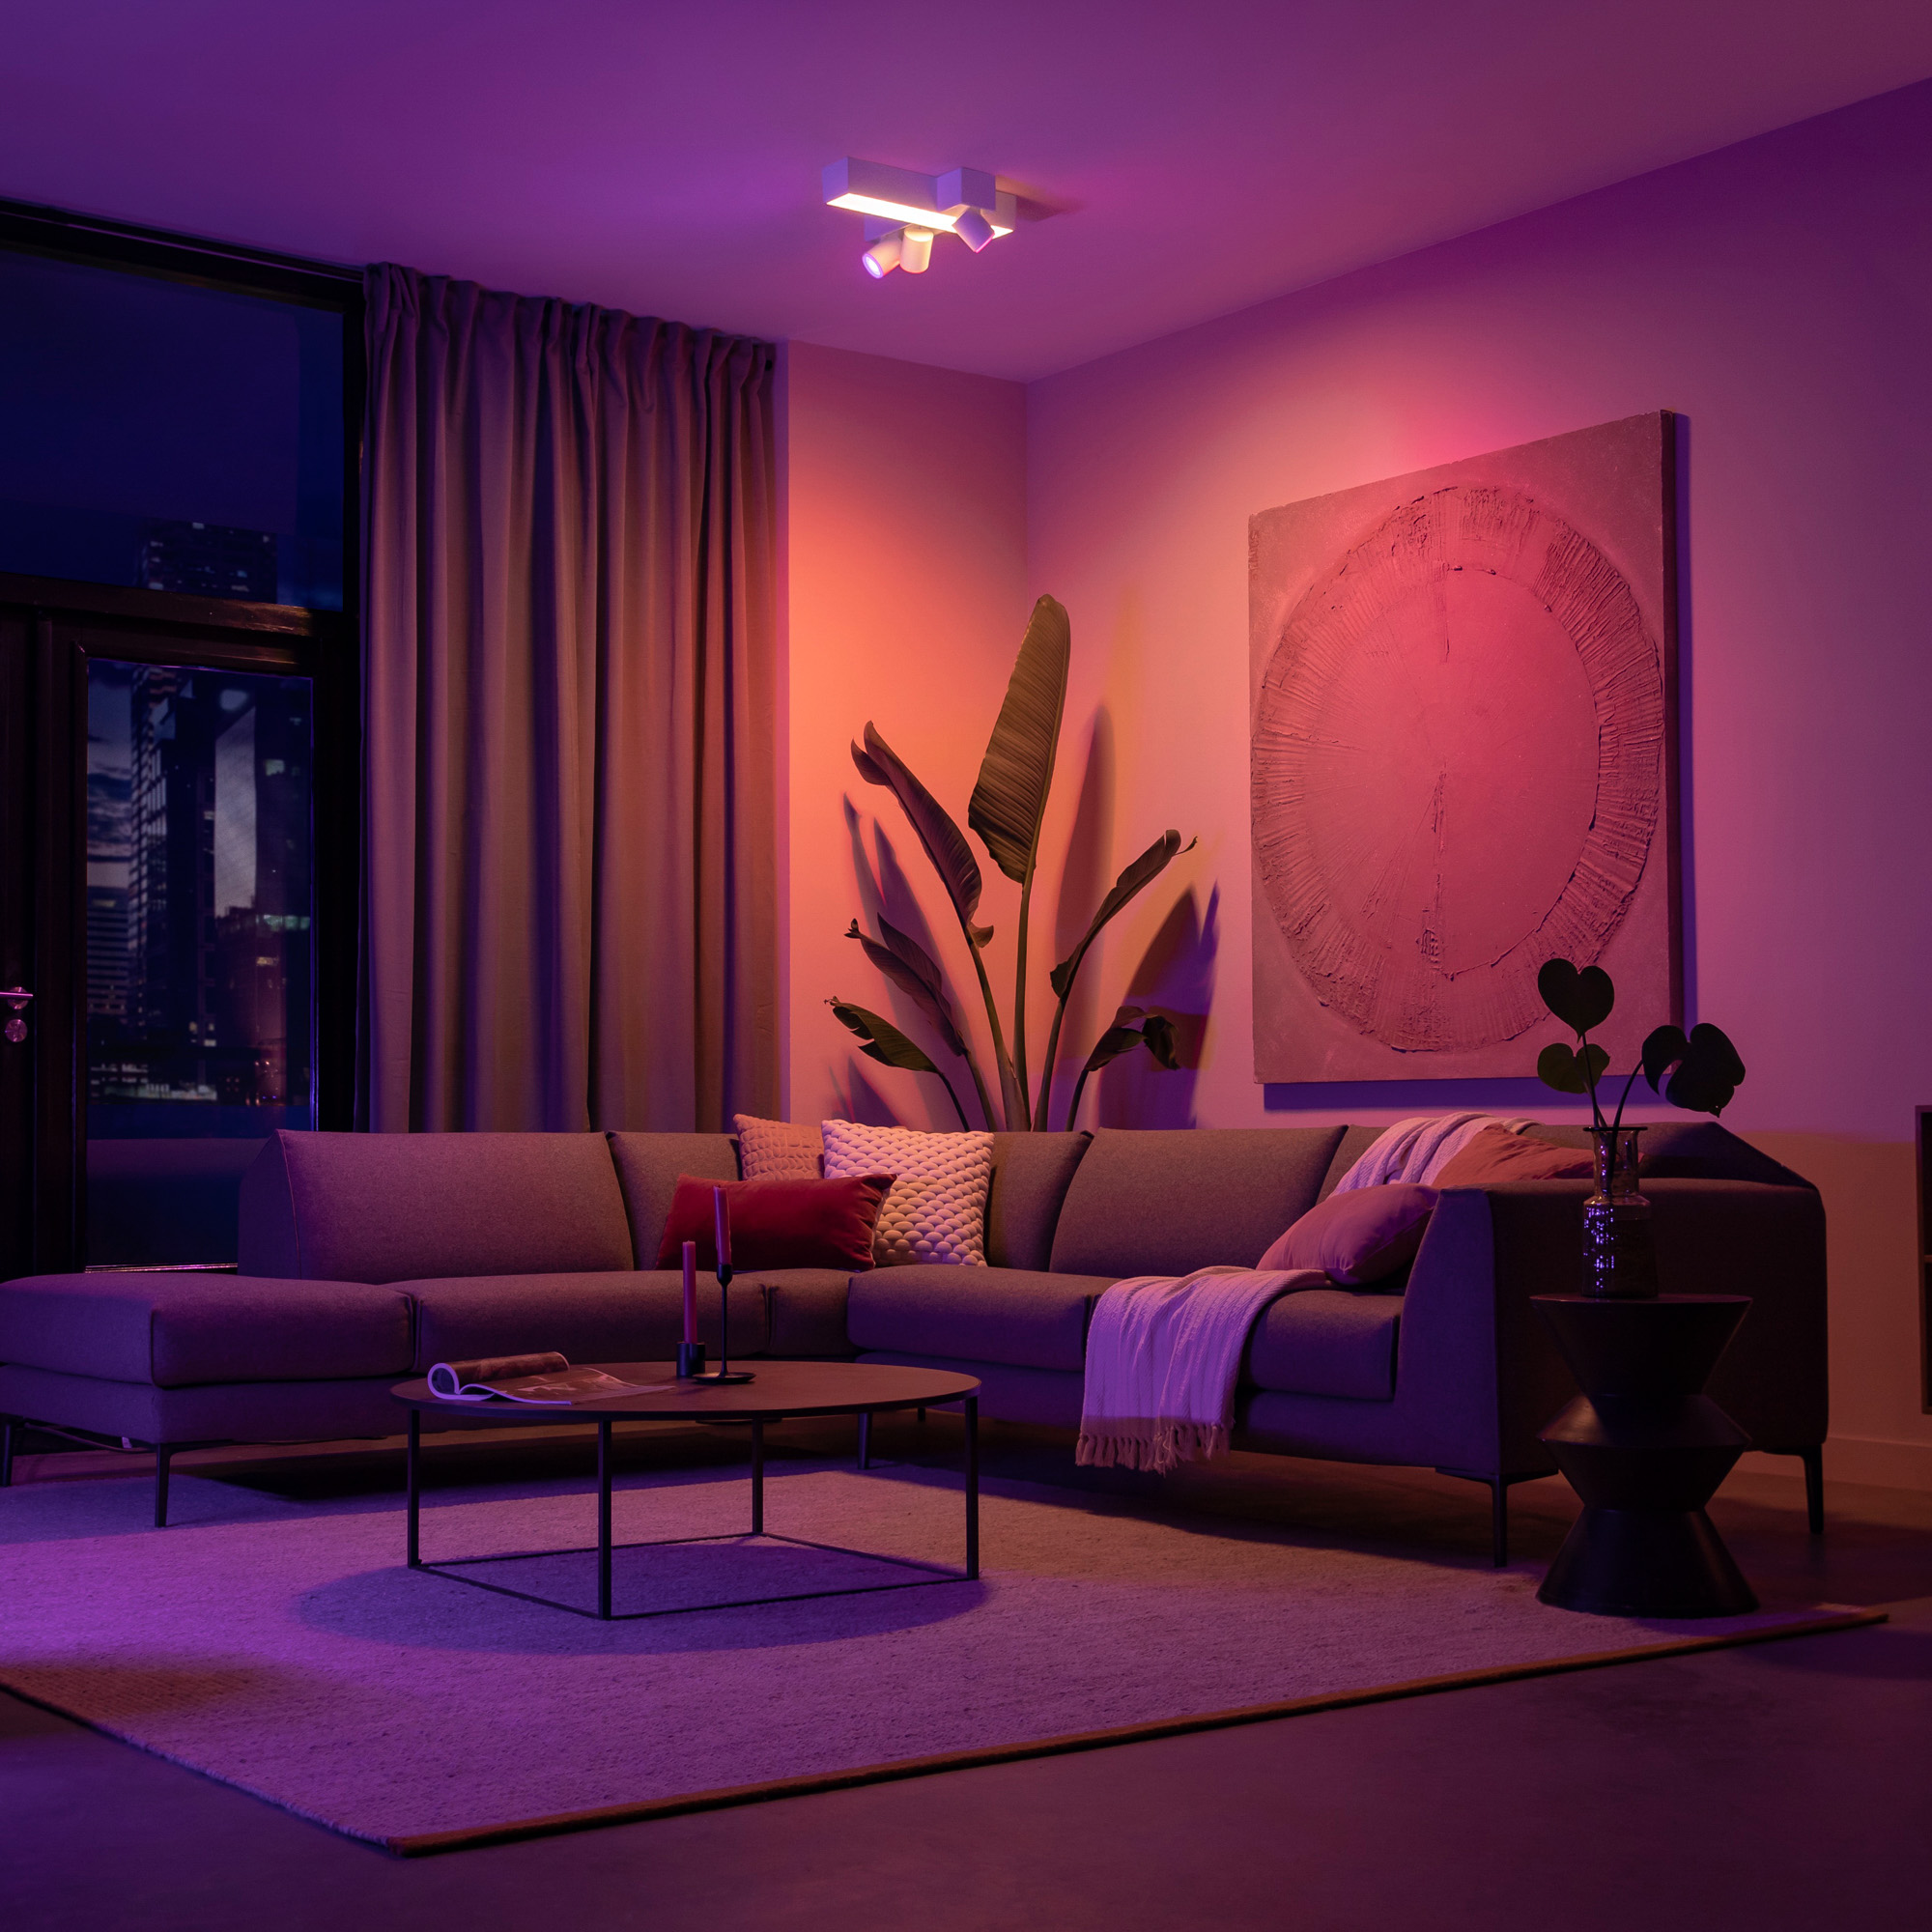 Philips Hue White & Color Ambiance Centris Cross LED Ceiling Light with 3 Spots white 2850lm